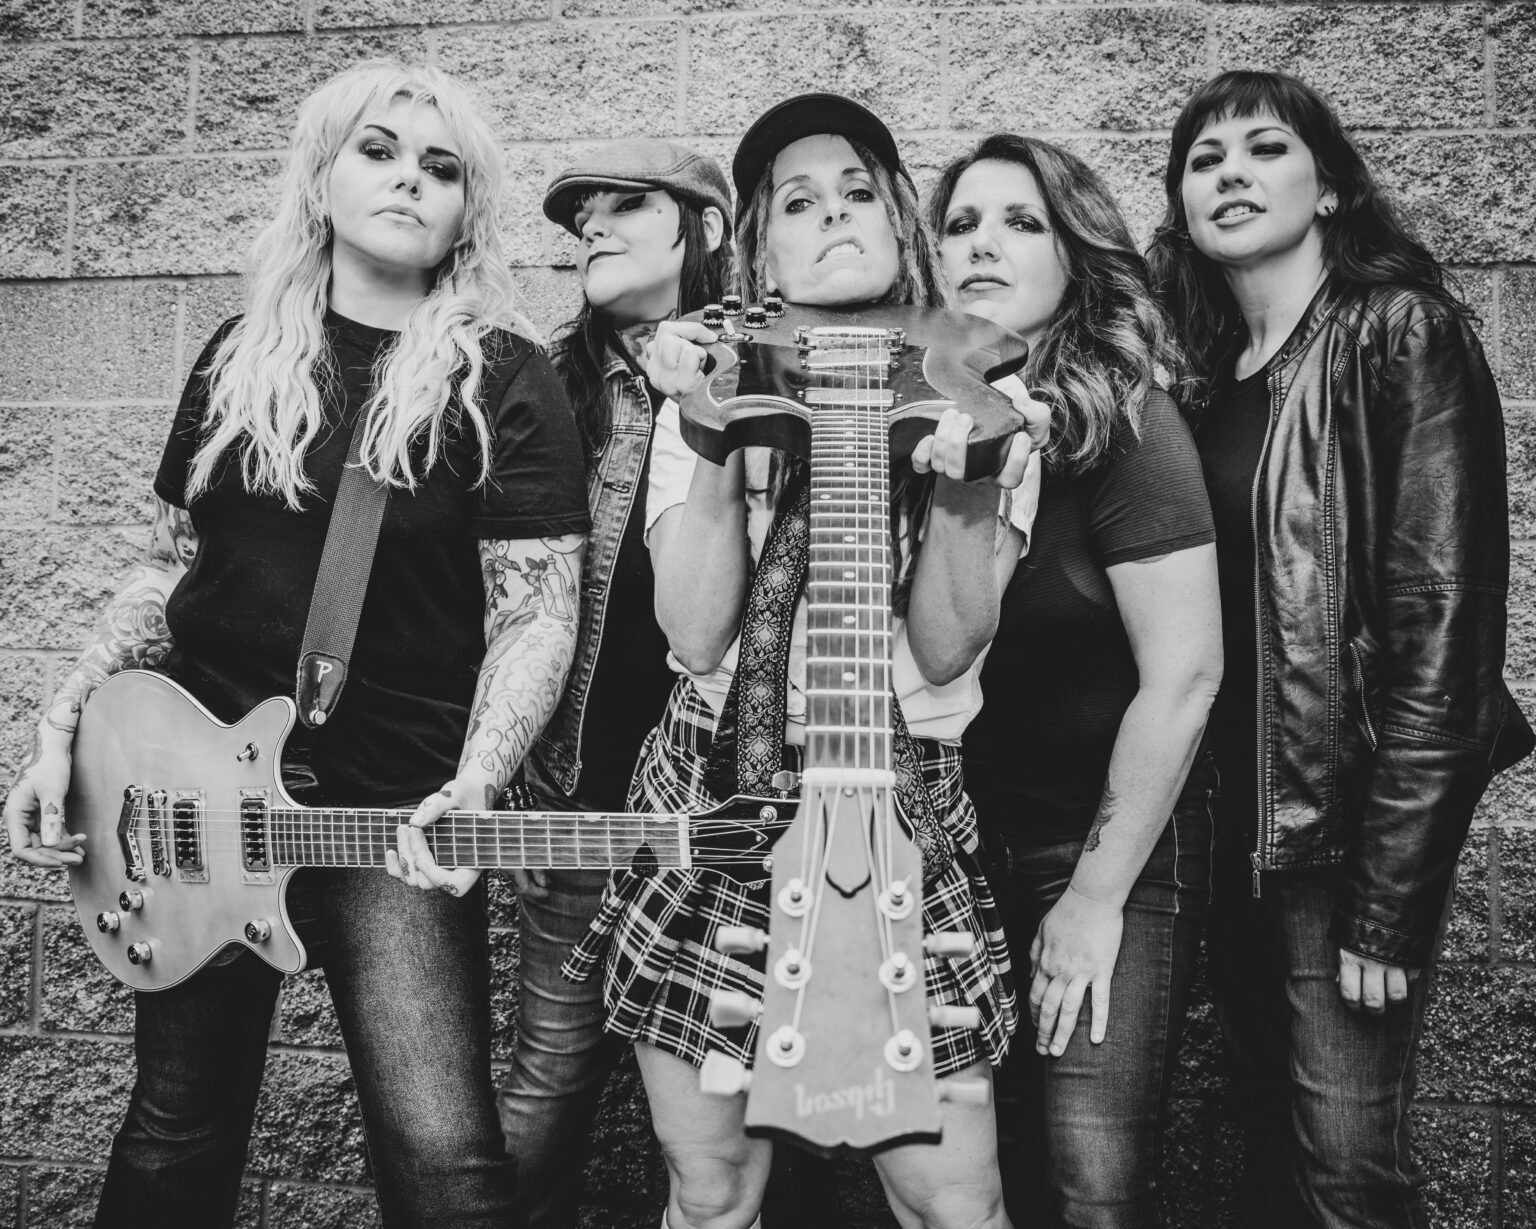 Longtime Seattle band Hell’s Belles will bring their high energy AC/DC tribute tunes to the Shakedown for two shows on Friday